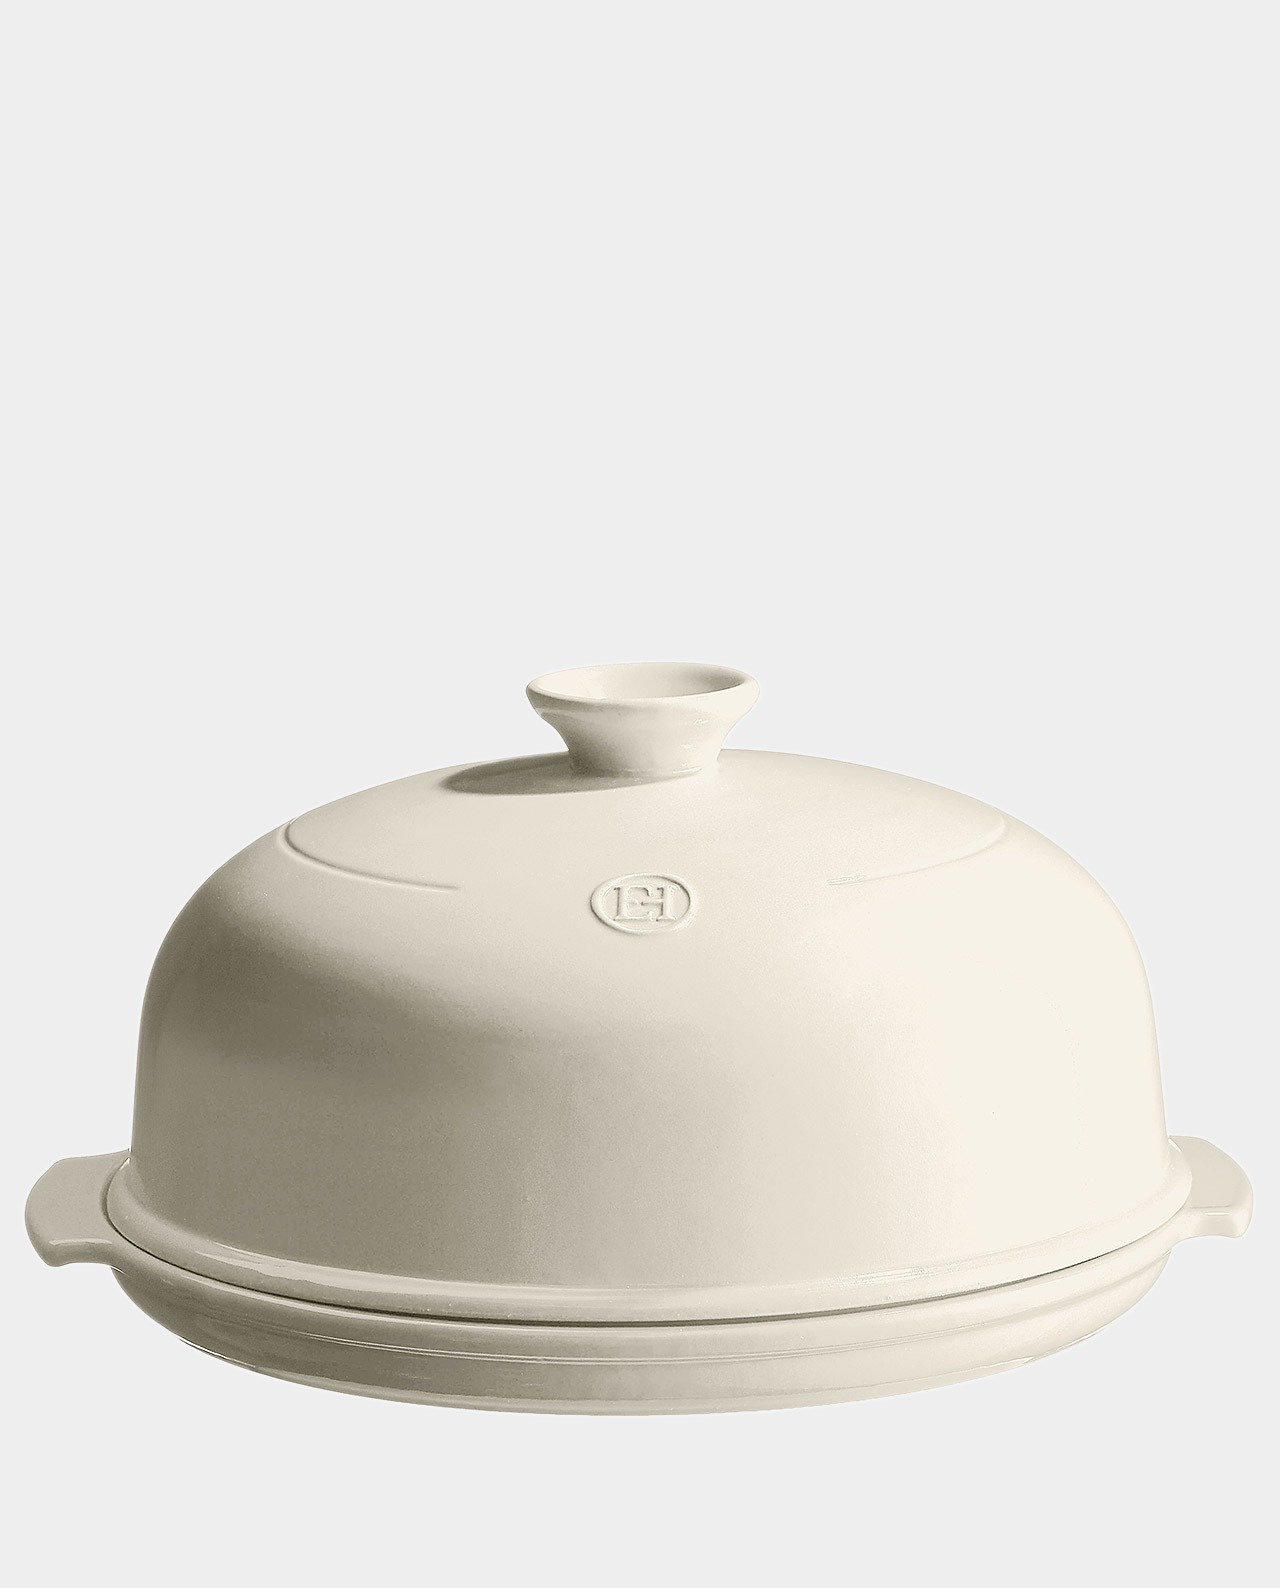 Tips for Using an Emile Henry Baking Cloche